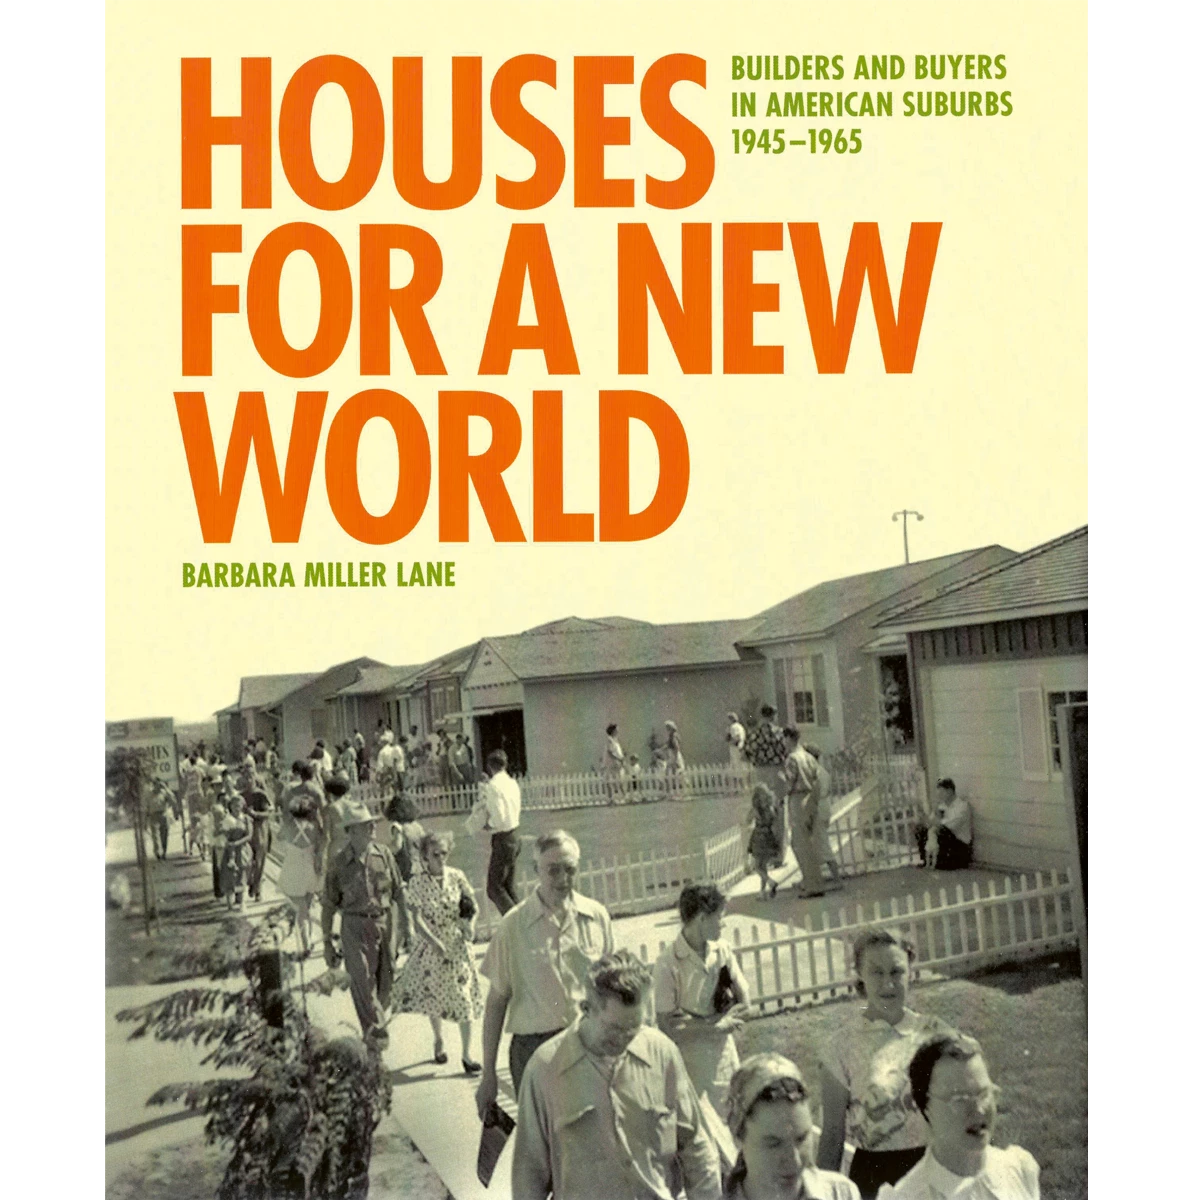 Houses for a New World